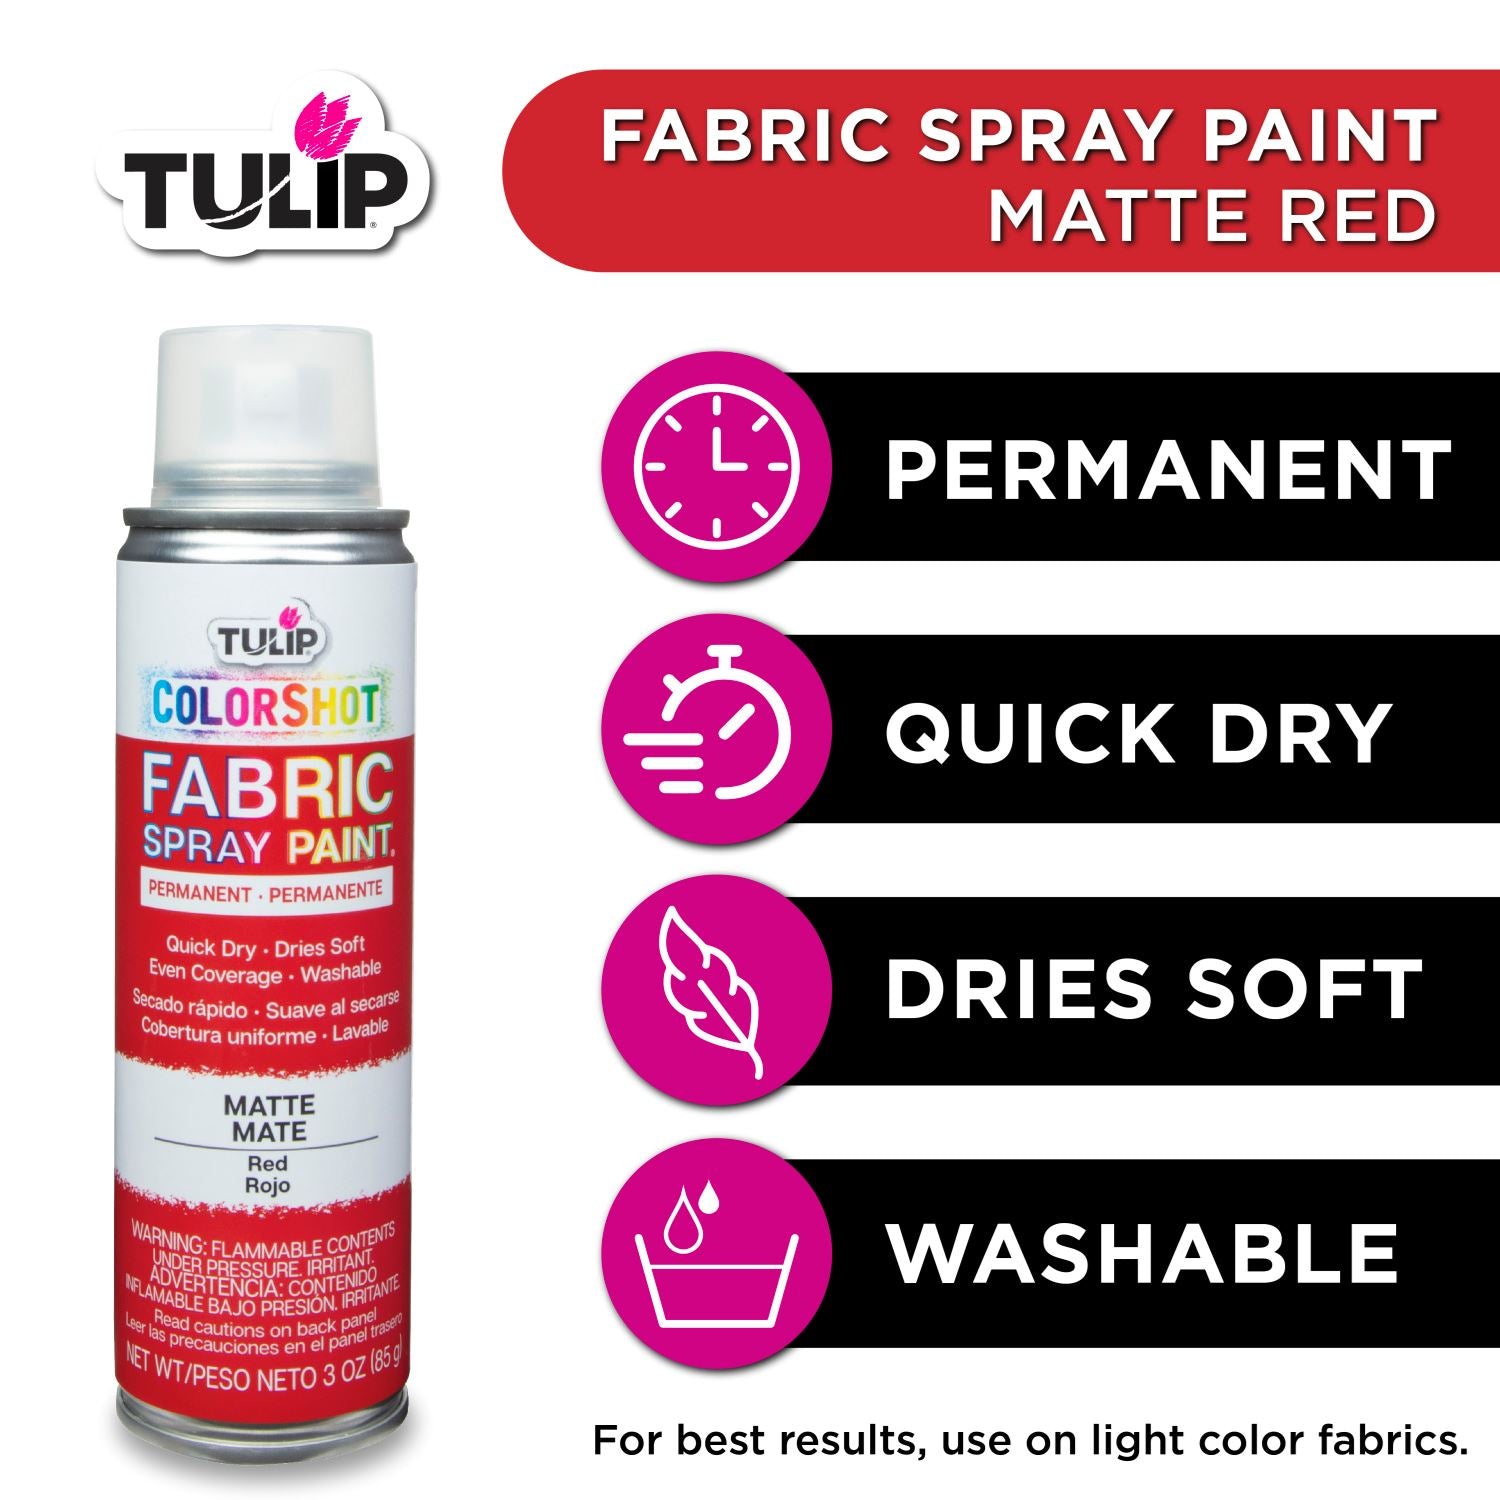 fabric spray paint matte red. permanent. quick dry. dries soft. washable.